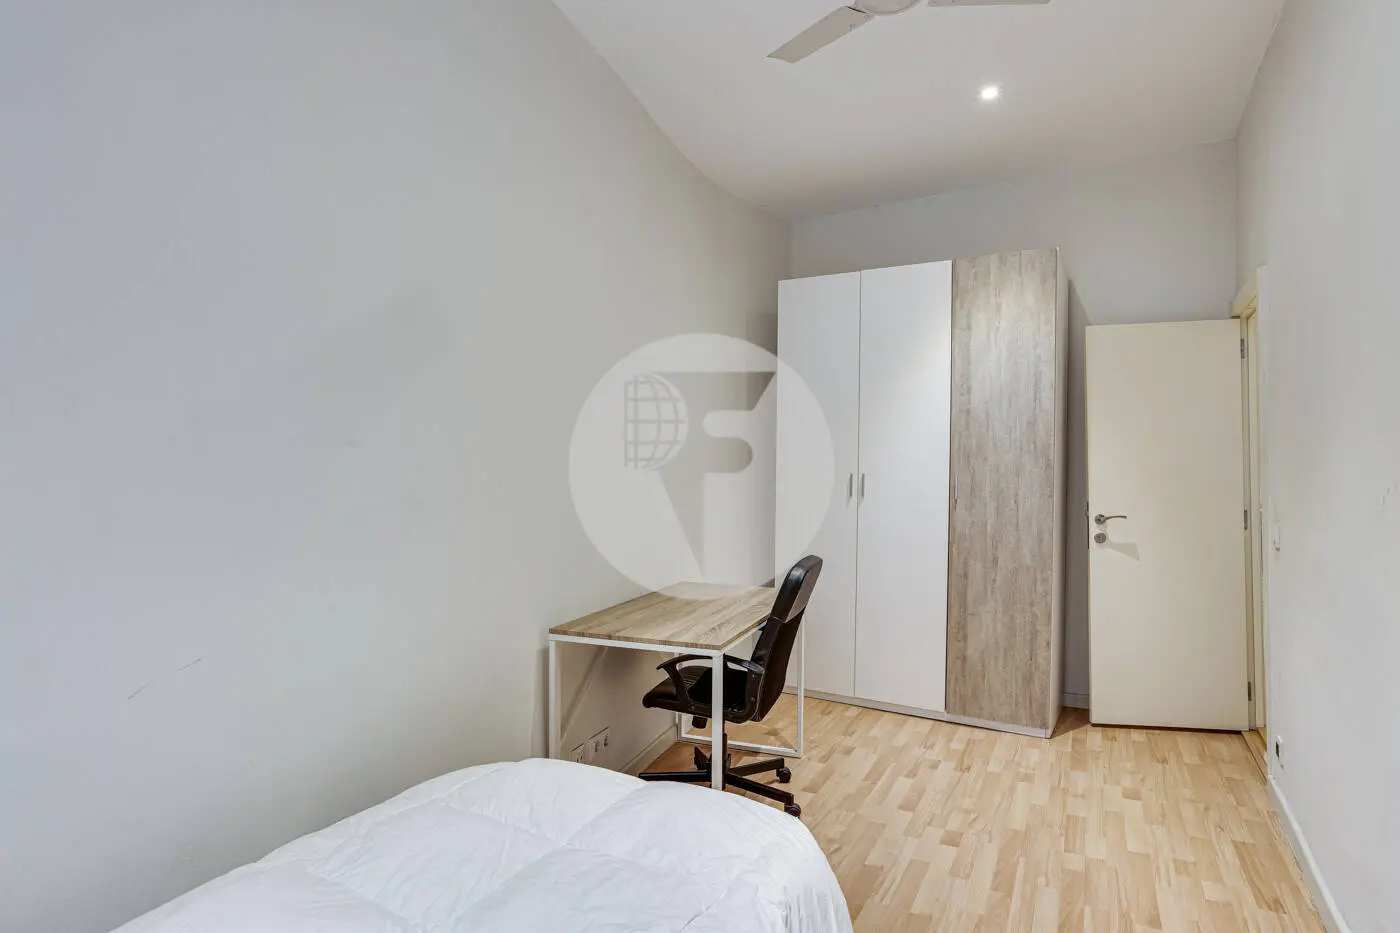 Magnificent apartment for sale next to Pl Universitat of 114m2 according to the land registry, located on Tallers Street in the Ciutat Vella neighborhood of Barcelona 24